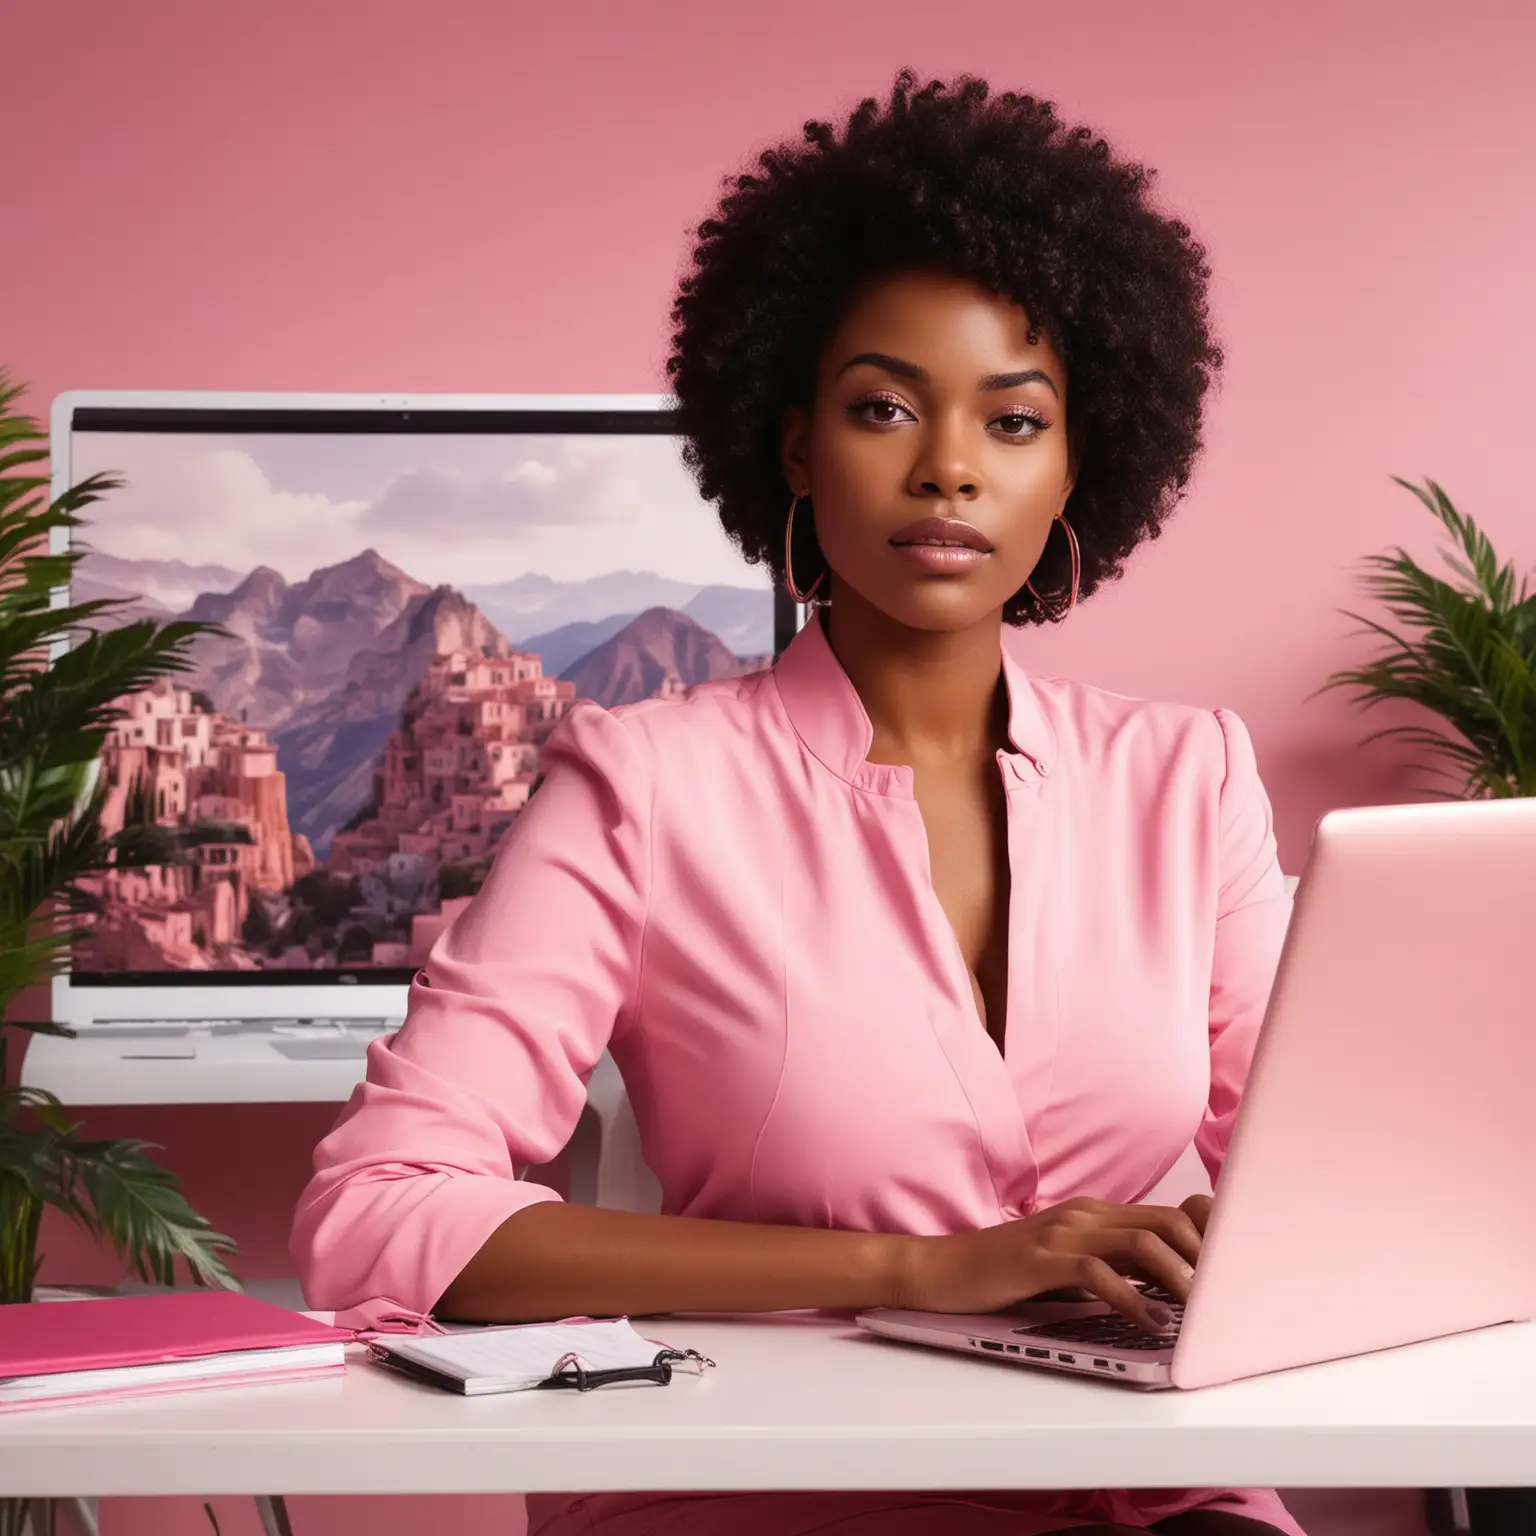 black Woman , large bust in office on laptop. Scenery is pink and luxury.  Use image for exact face